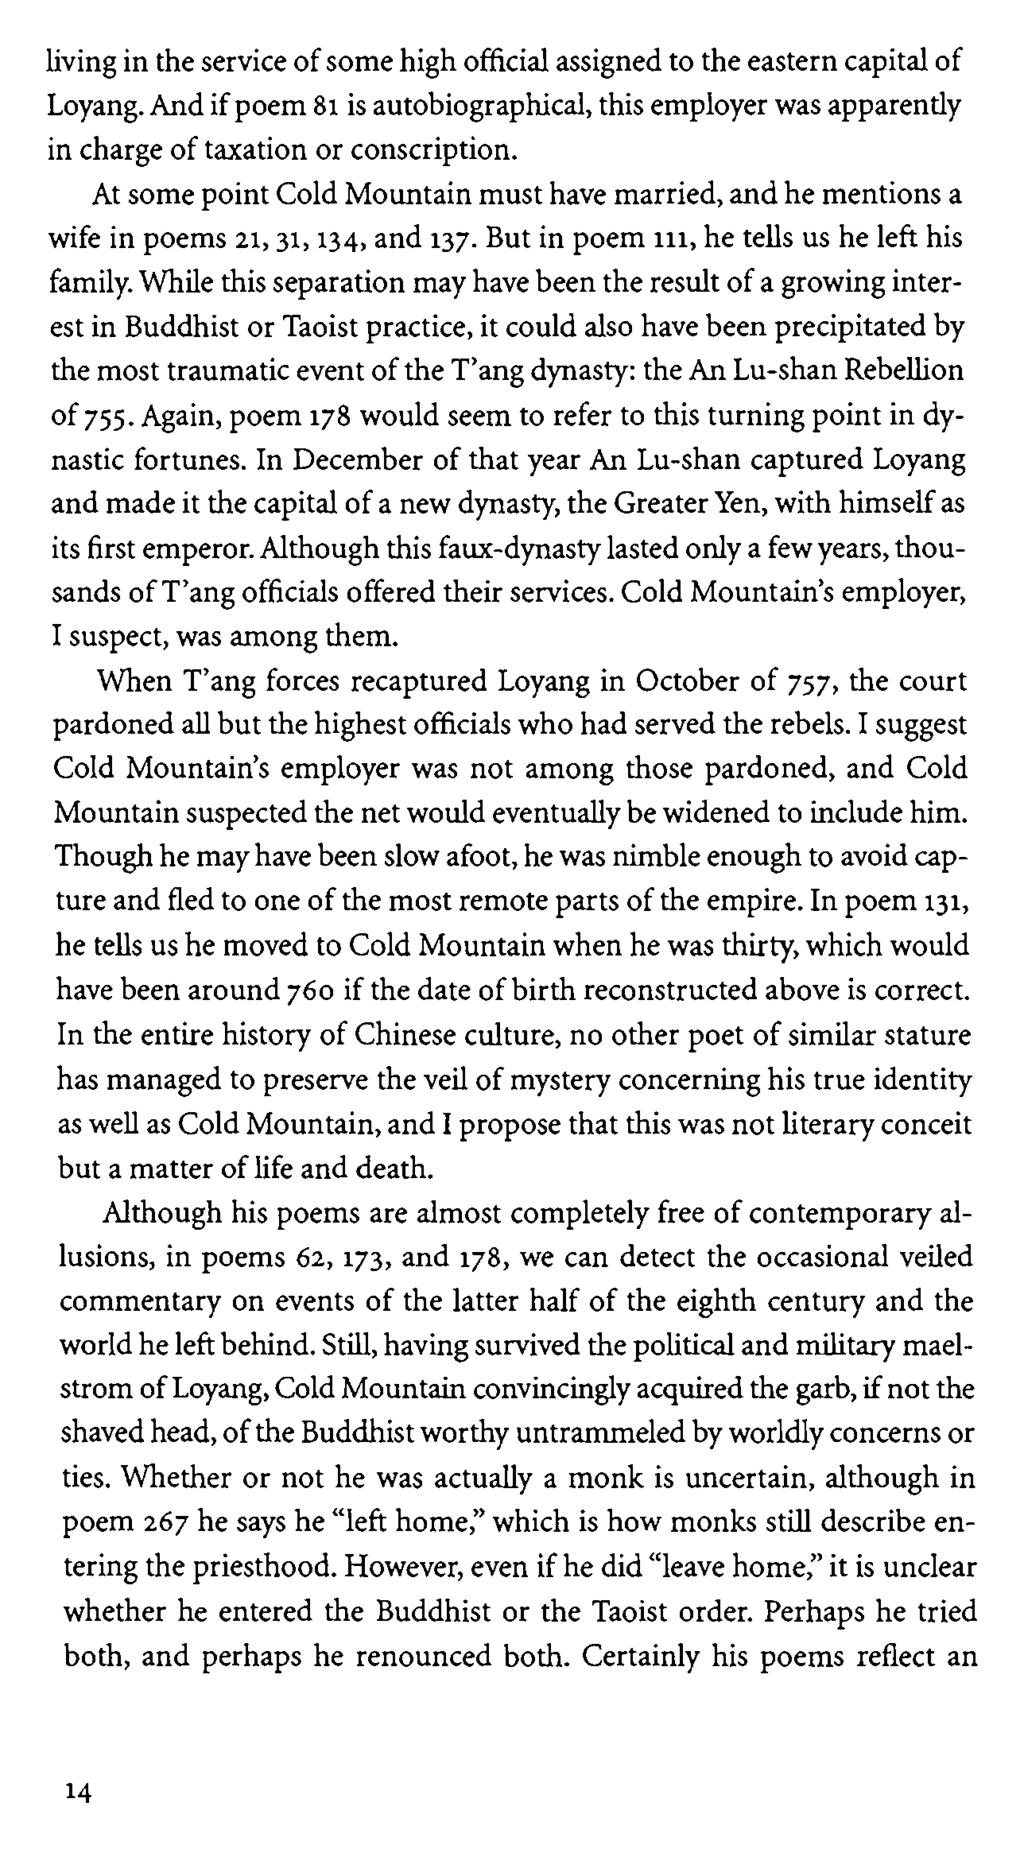 living in the service of some high official assigned to the eastern capital of Loyang. And if poem 81 is autobiographical, this employer was apparently in charge of taxation or conscription.